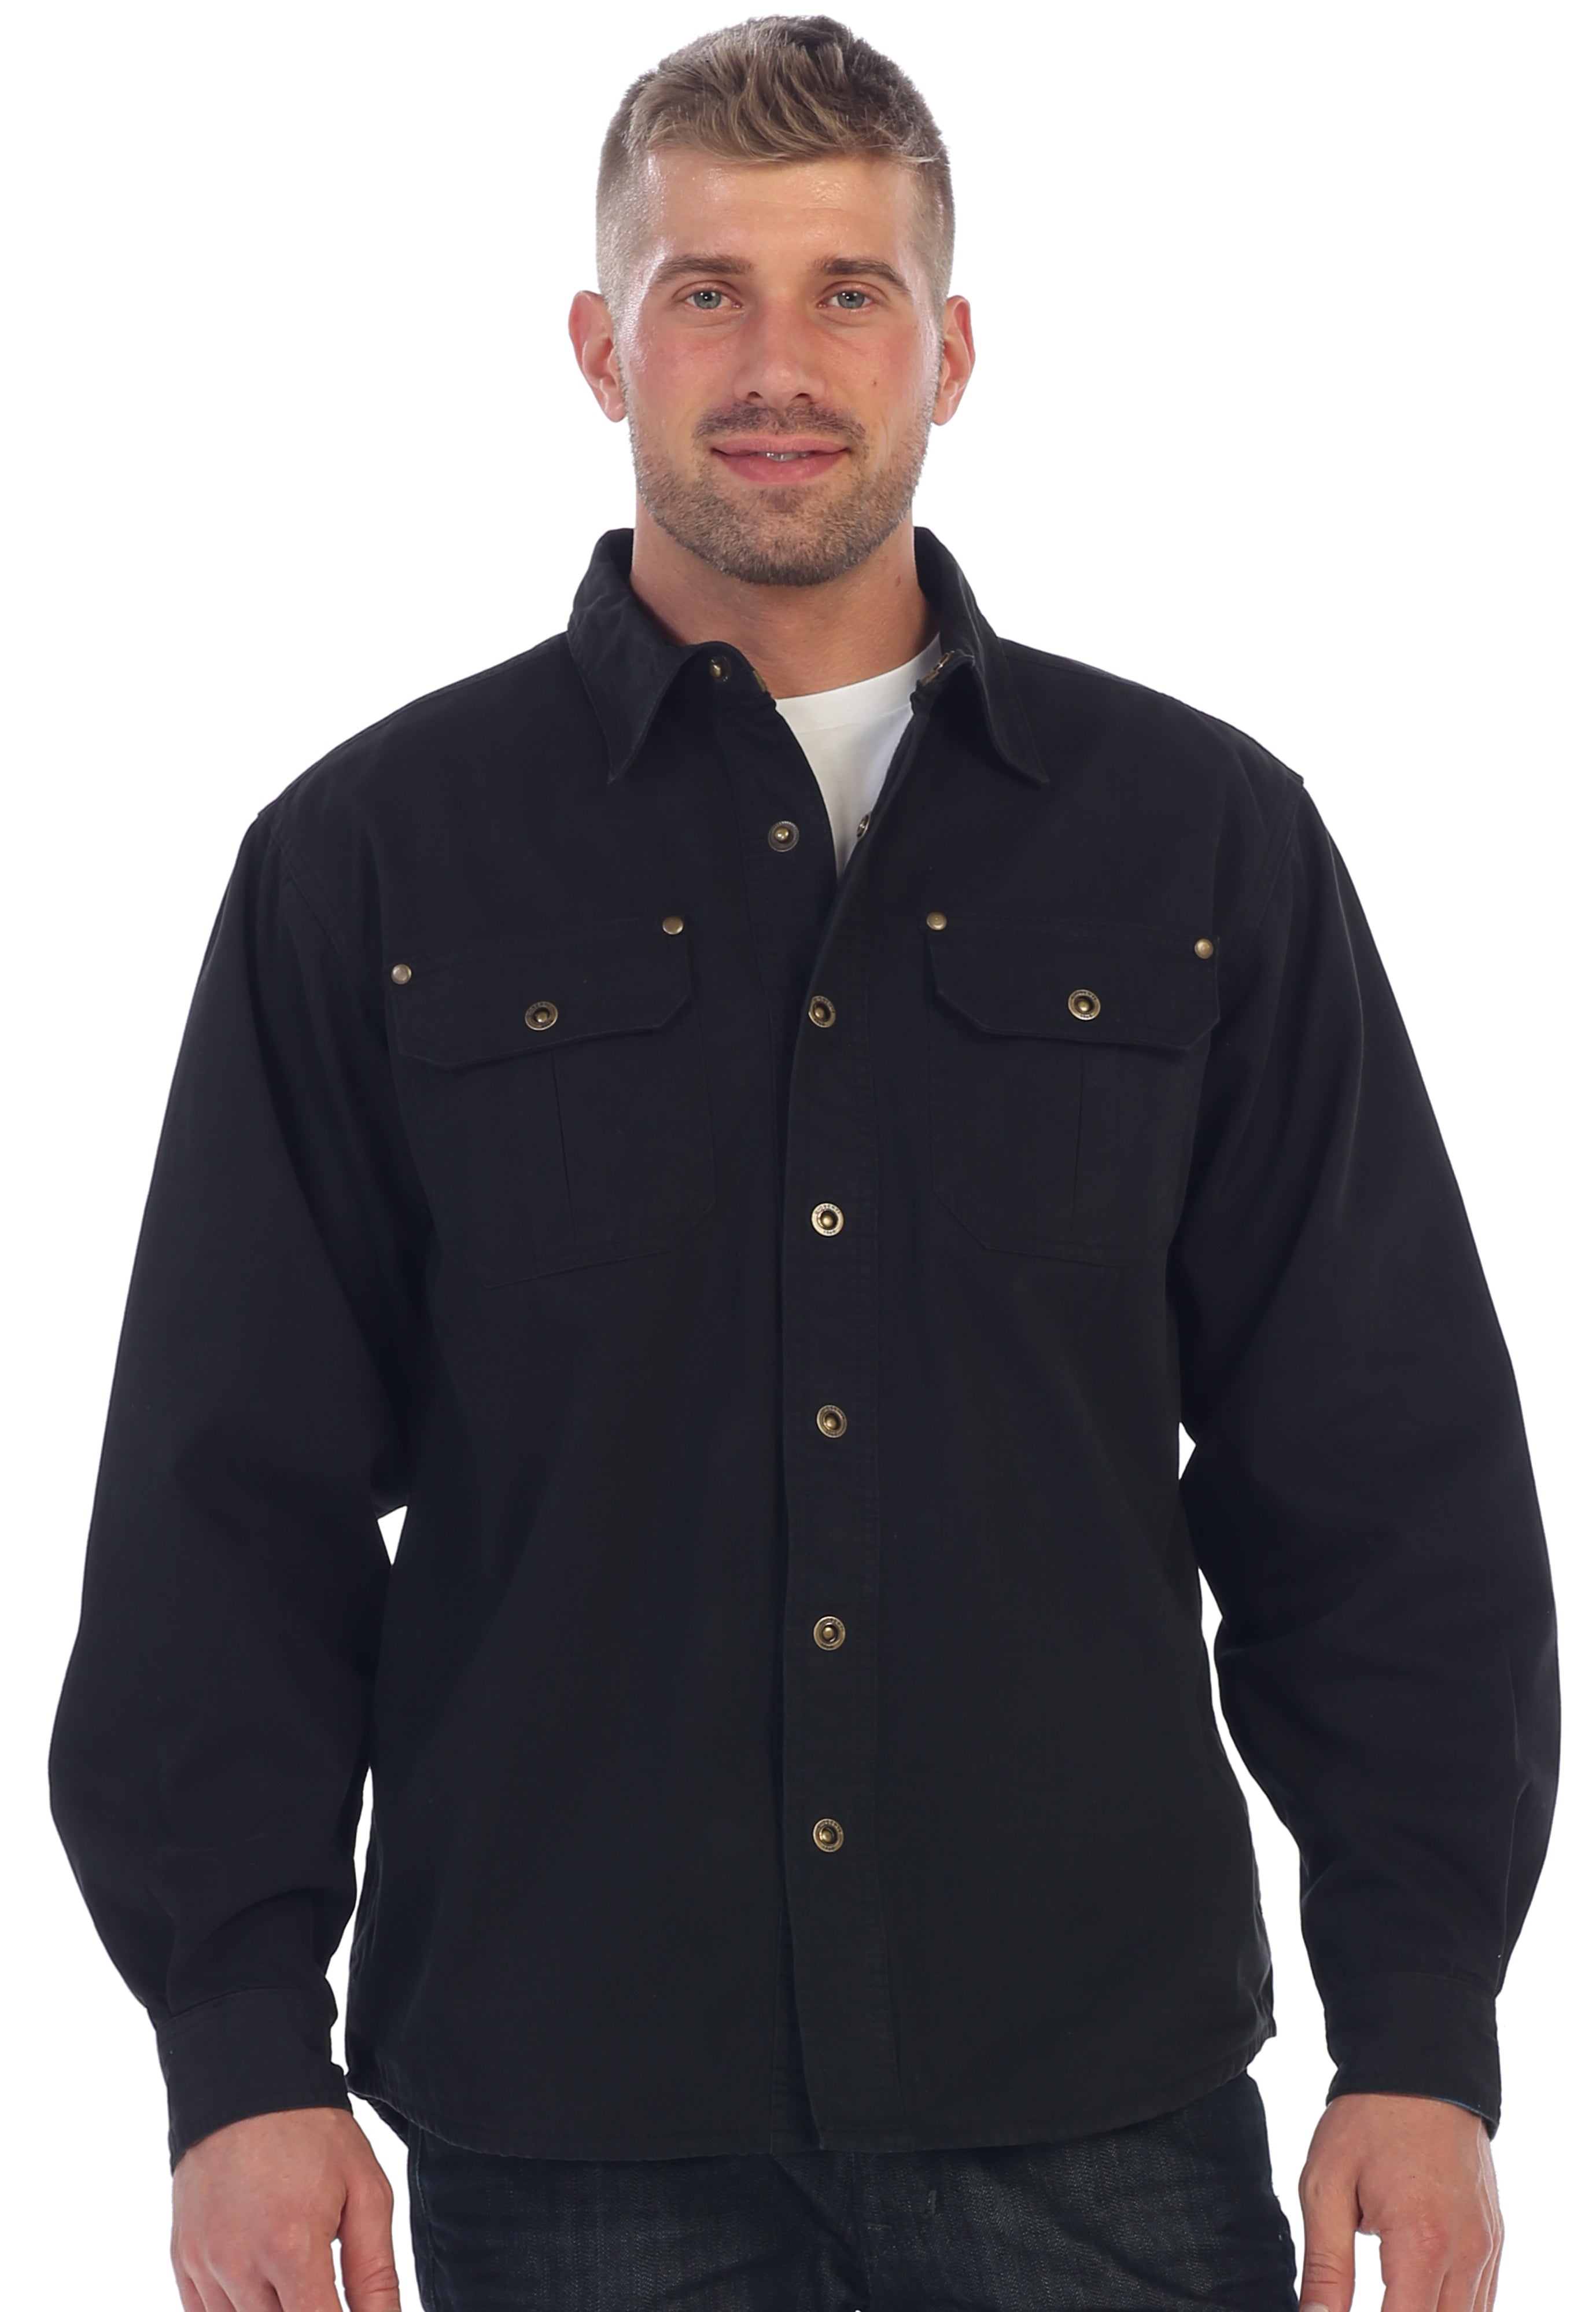 title:Gioberti Men's Black Cotton Brushed and Soft Twill Shirt Jacket with Flannel Lining;color:Black